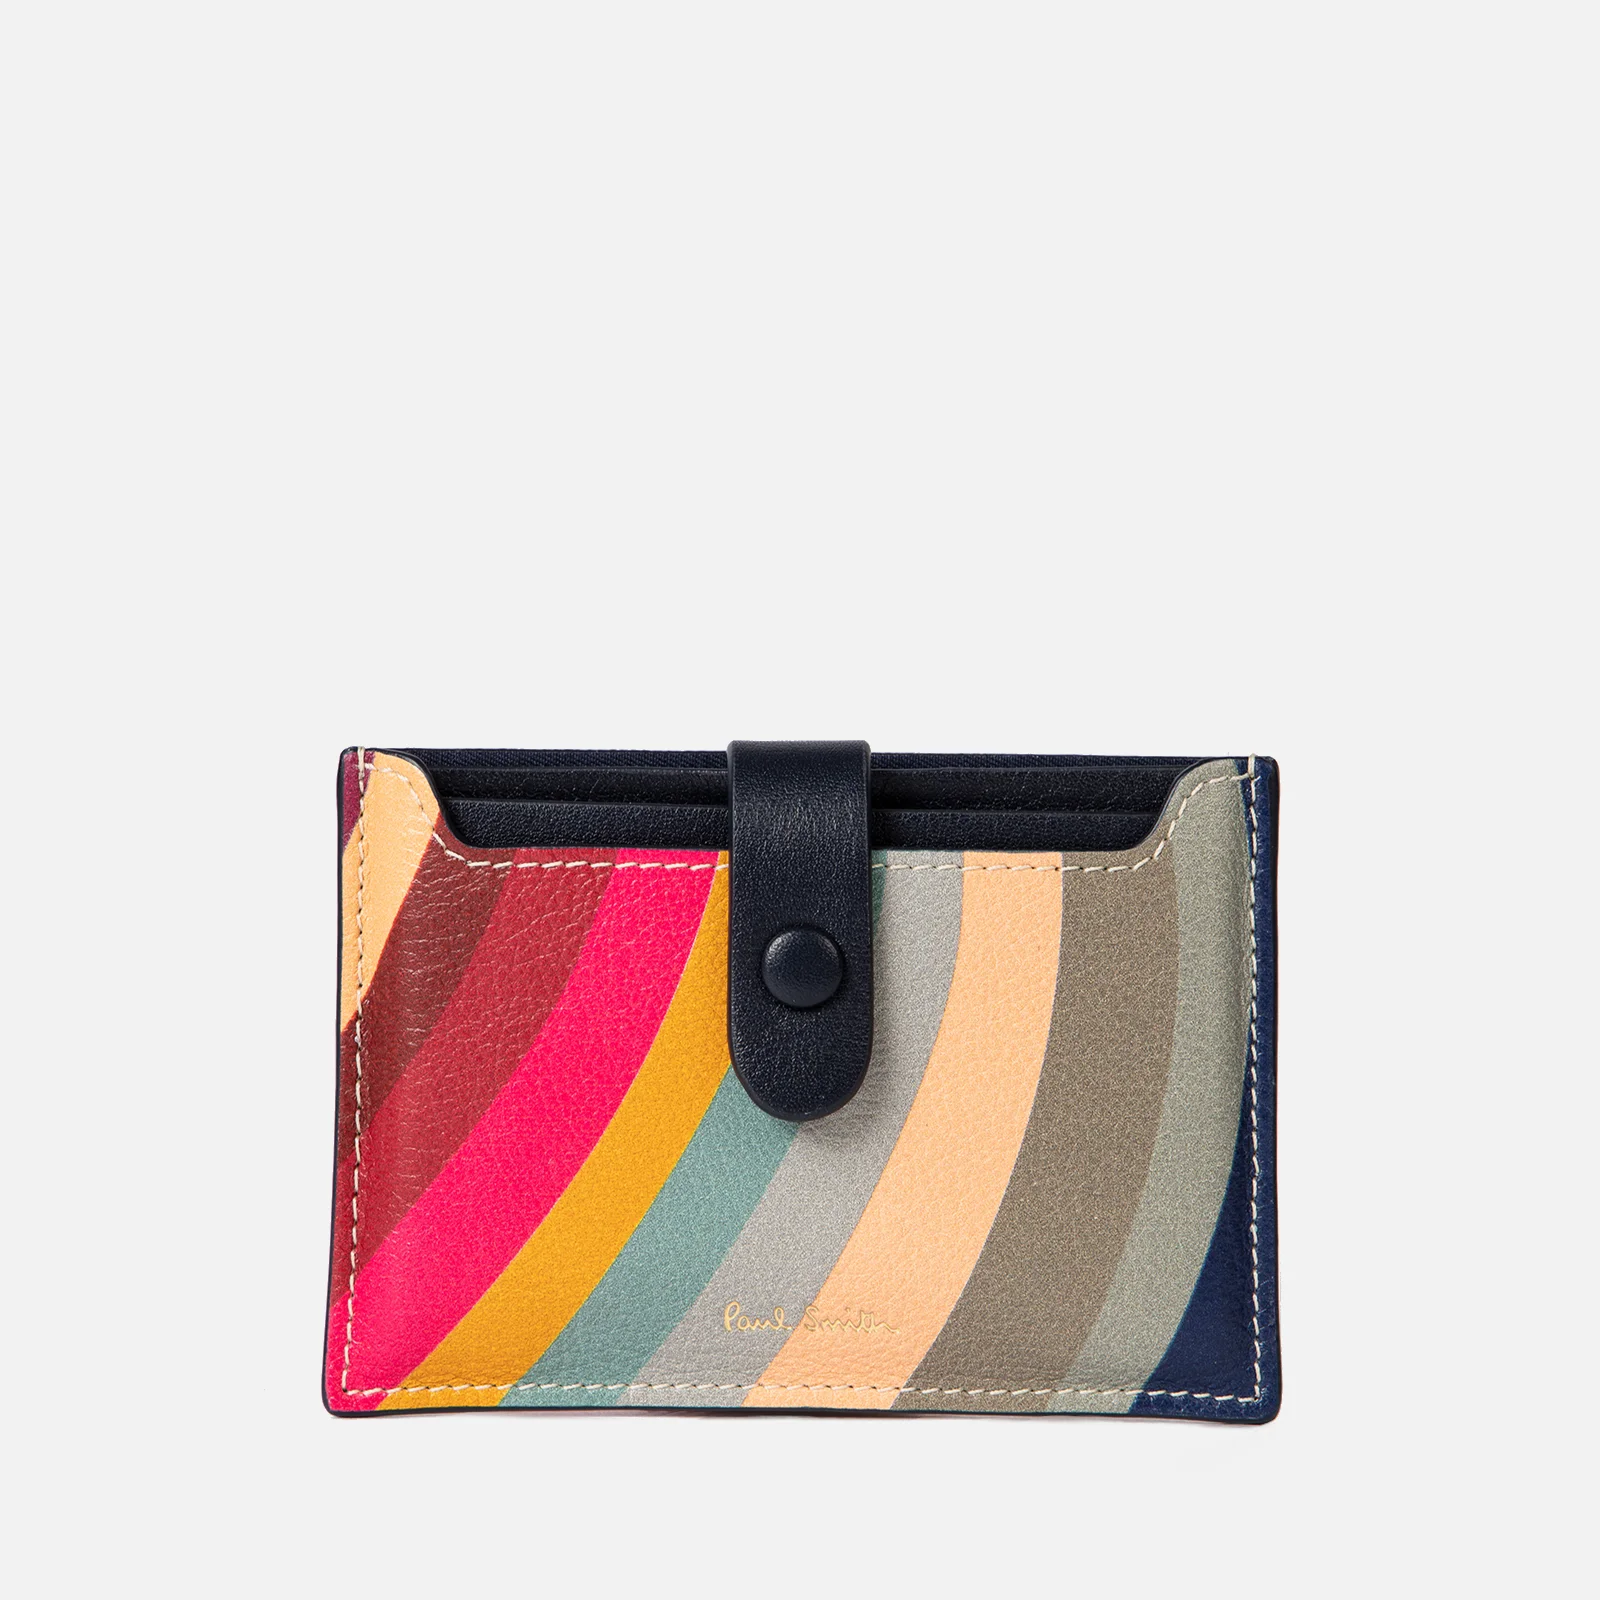 Paul Smith Swirl Striped Leather Coin Purse Image 1